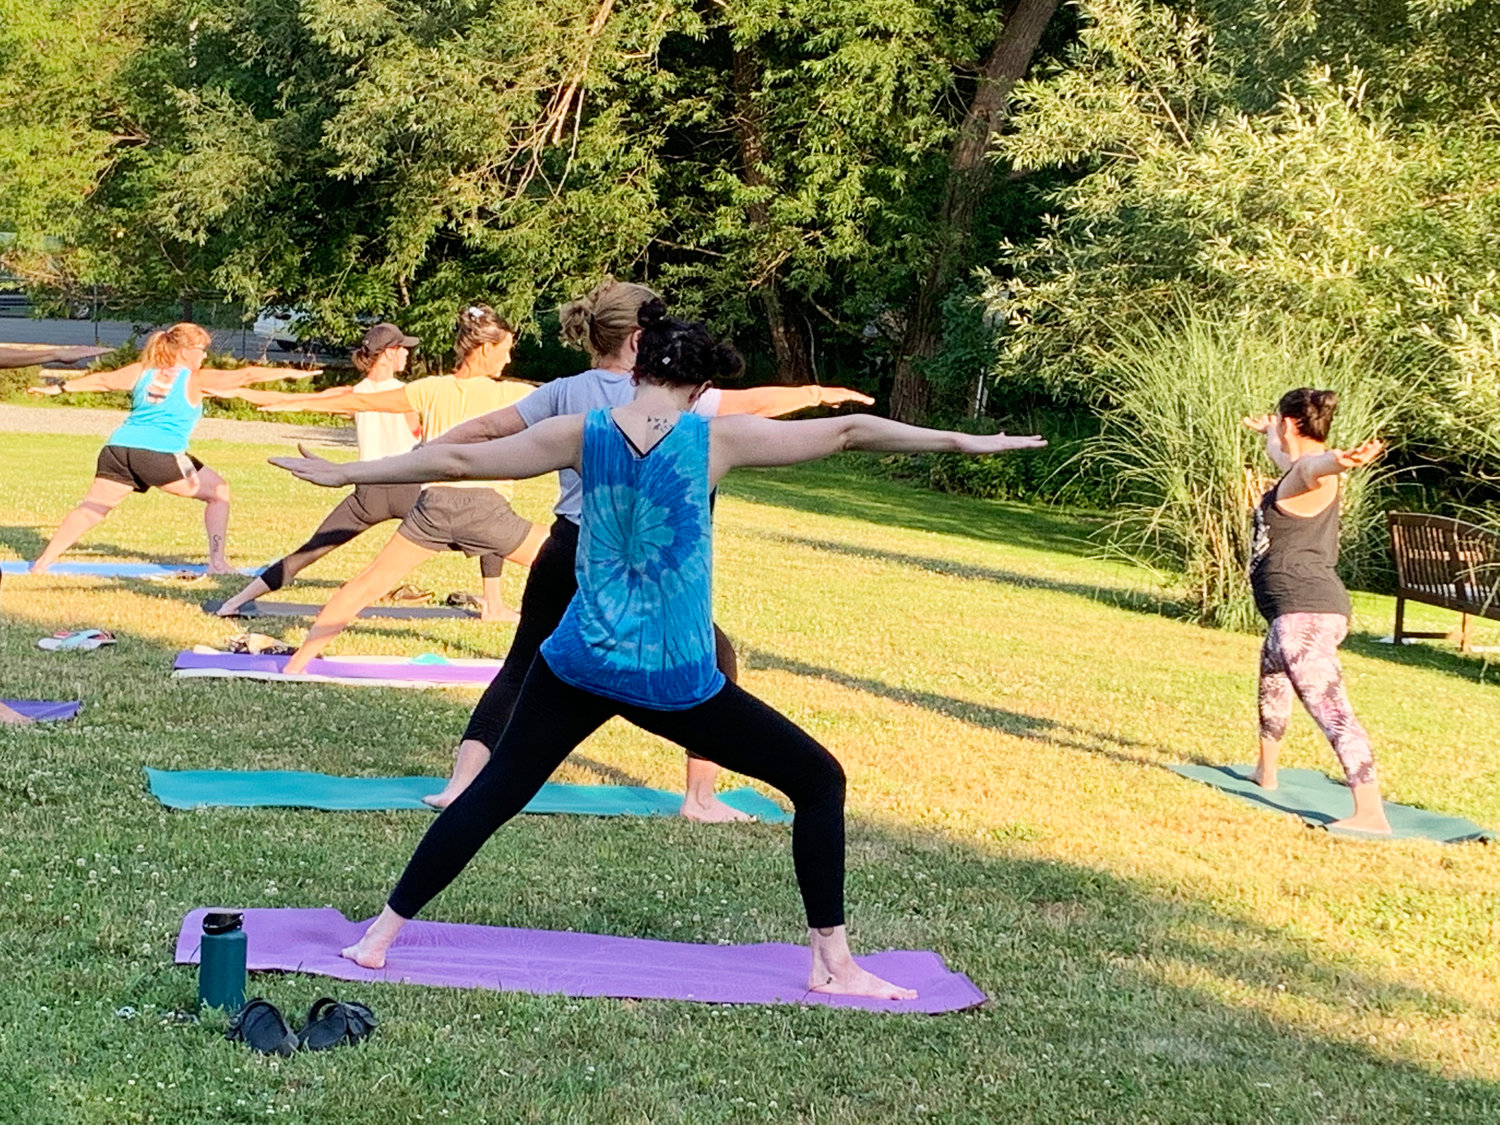 The first class of Creekside Sunset Yoga took place on July 11th in the park.